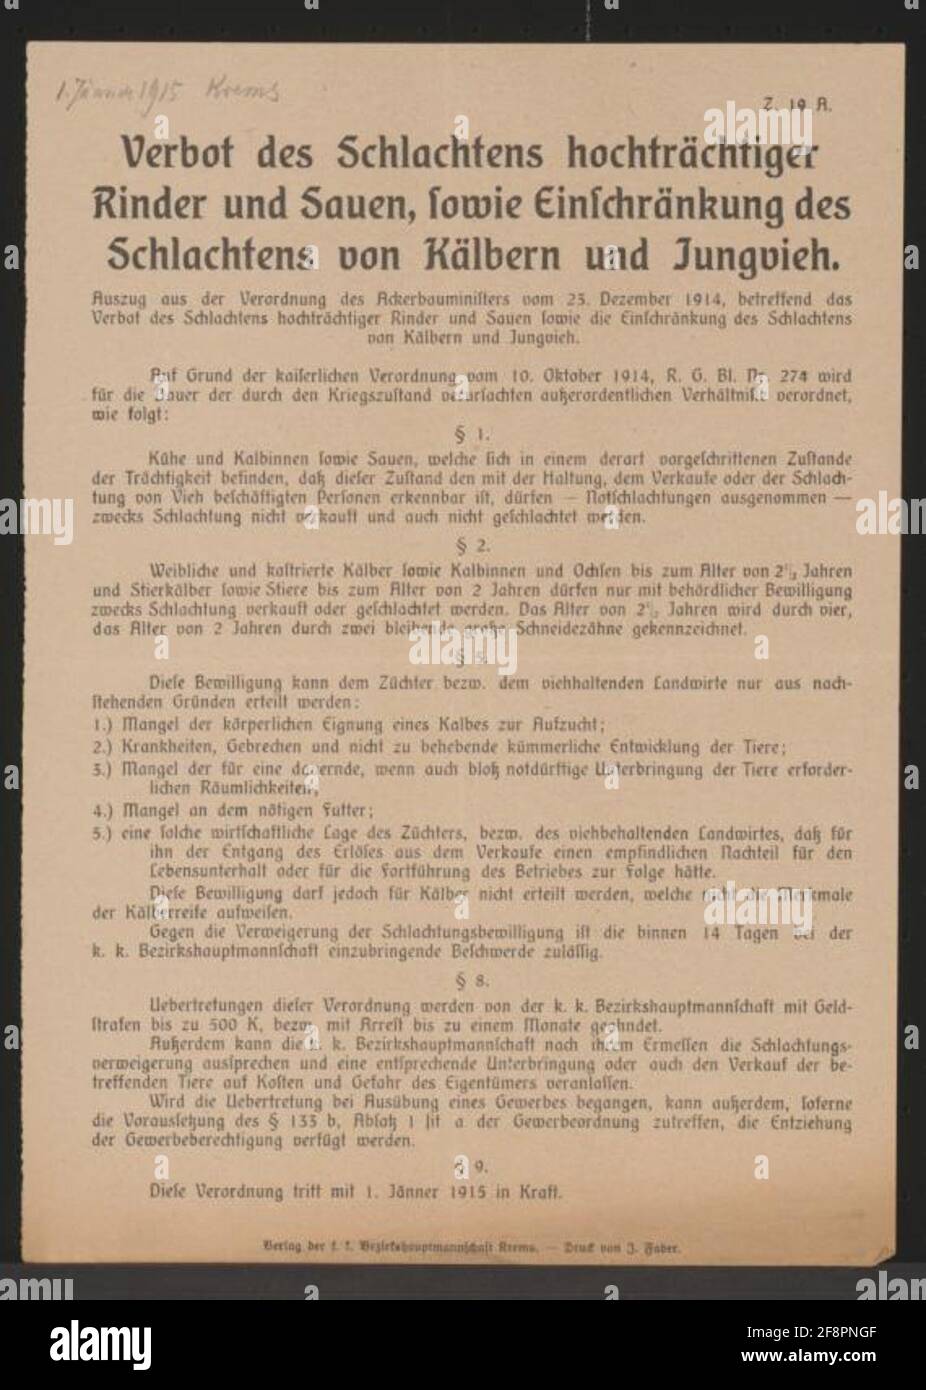 Prohibitions and restrictions on battles - Krems on the Danube ban on slaughter of highly striking cattle and sows, as well as restrictions of the slaughter of calves and young vieh - transgressions are punished - this regulation enters into force on 1 January 1915 - Z. 19 A. Stock Photo